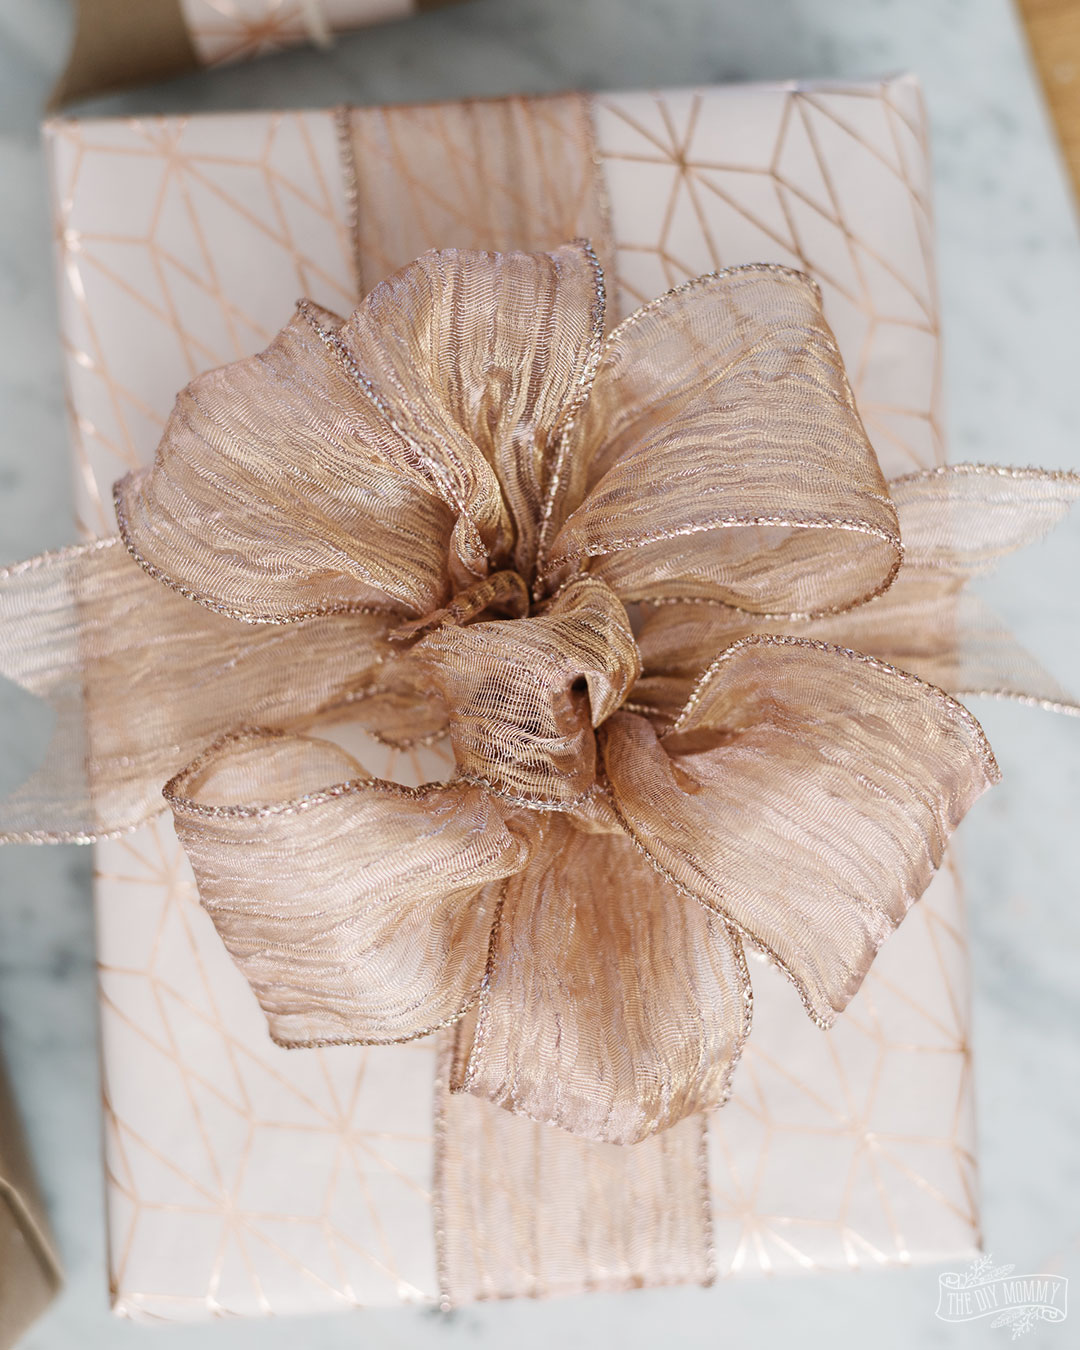 These beautiful gift wrap ideas are inexpensive and easy to recreate!